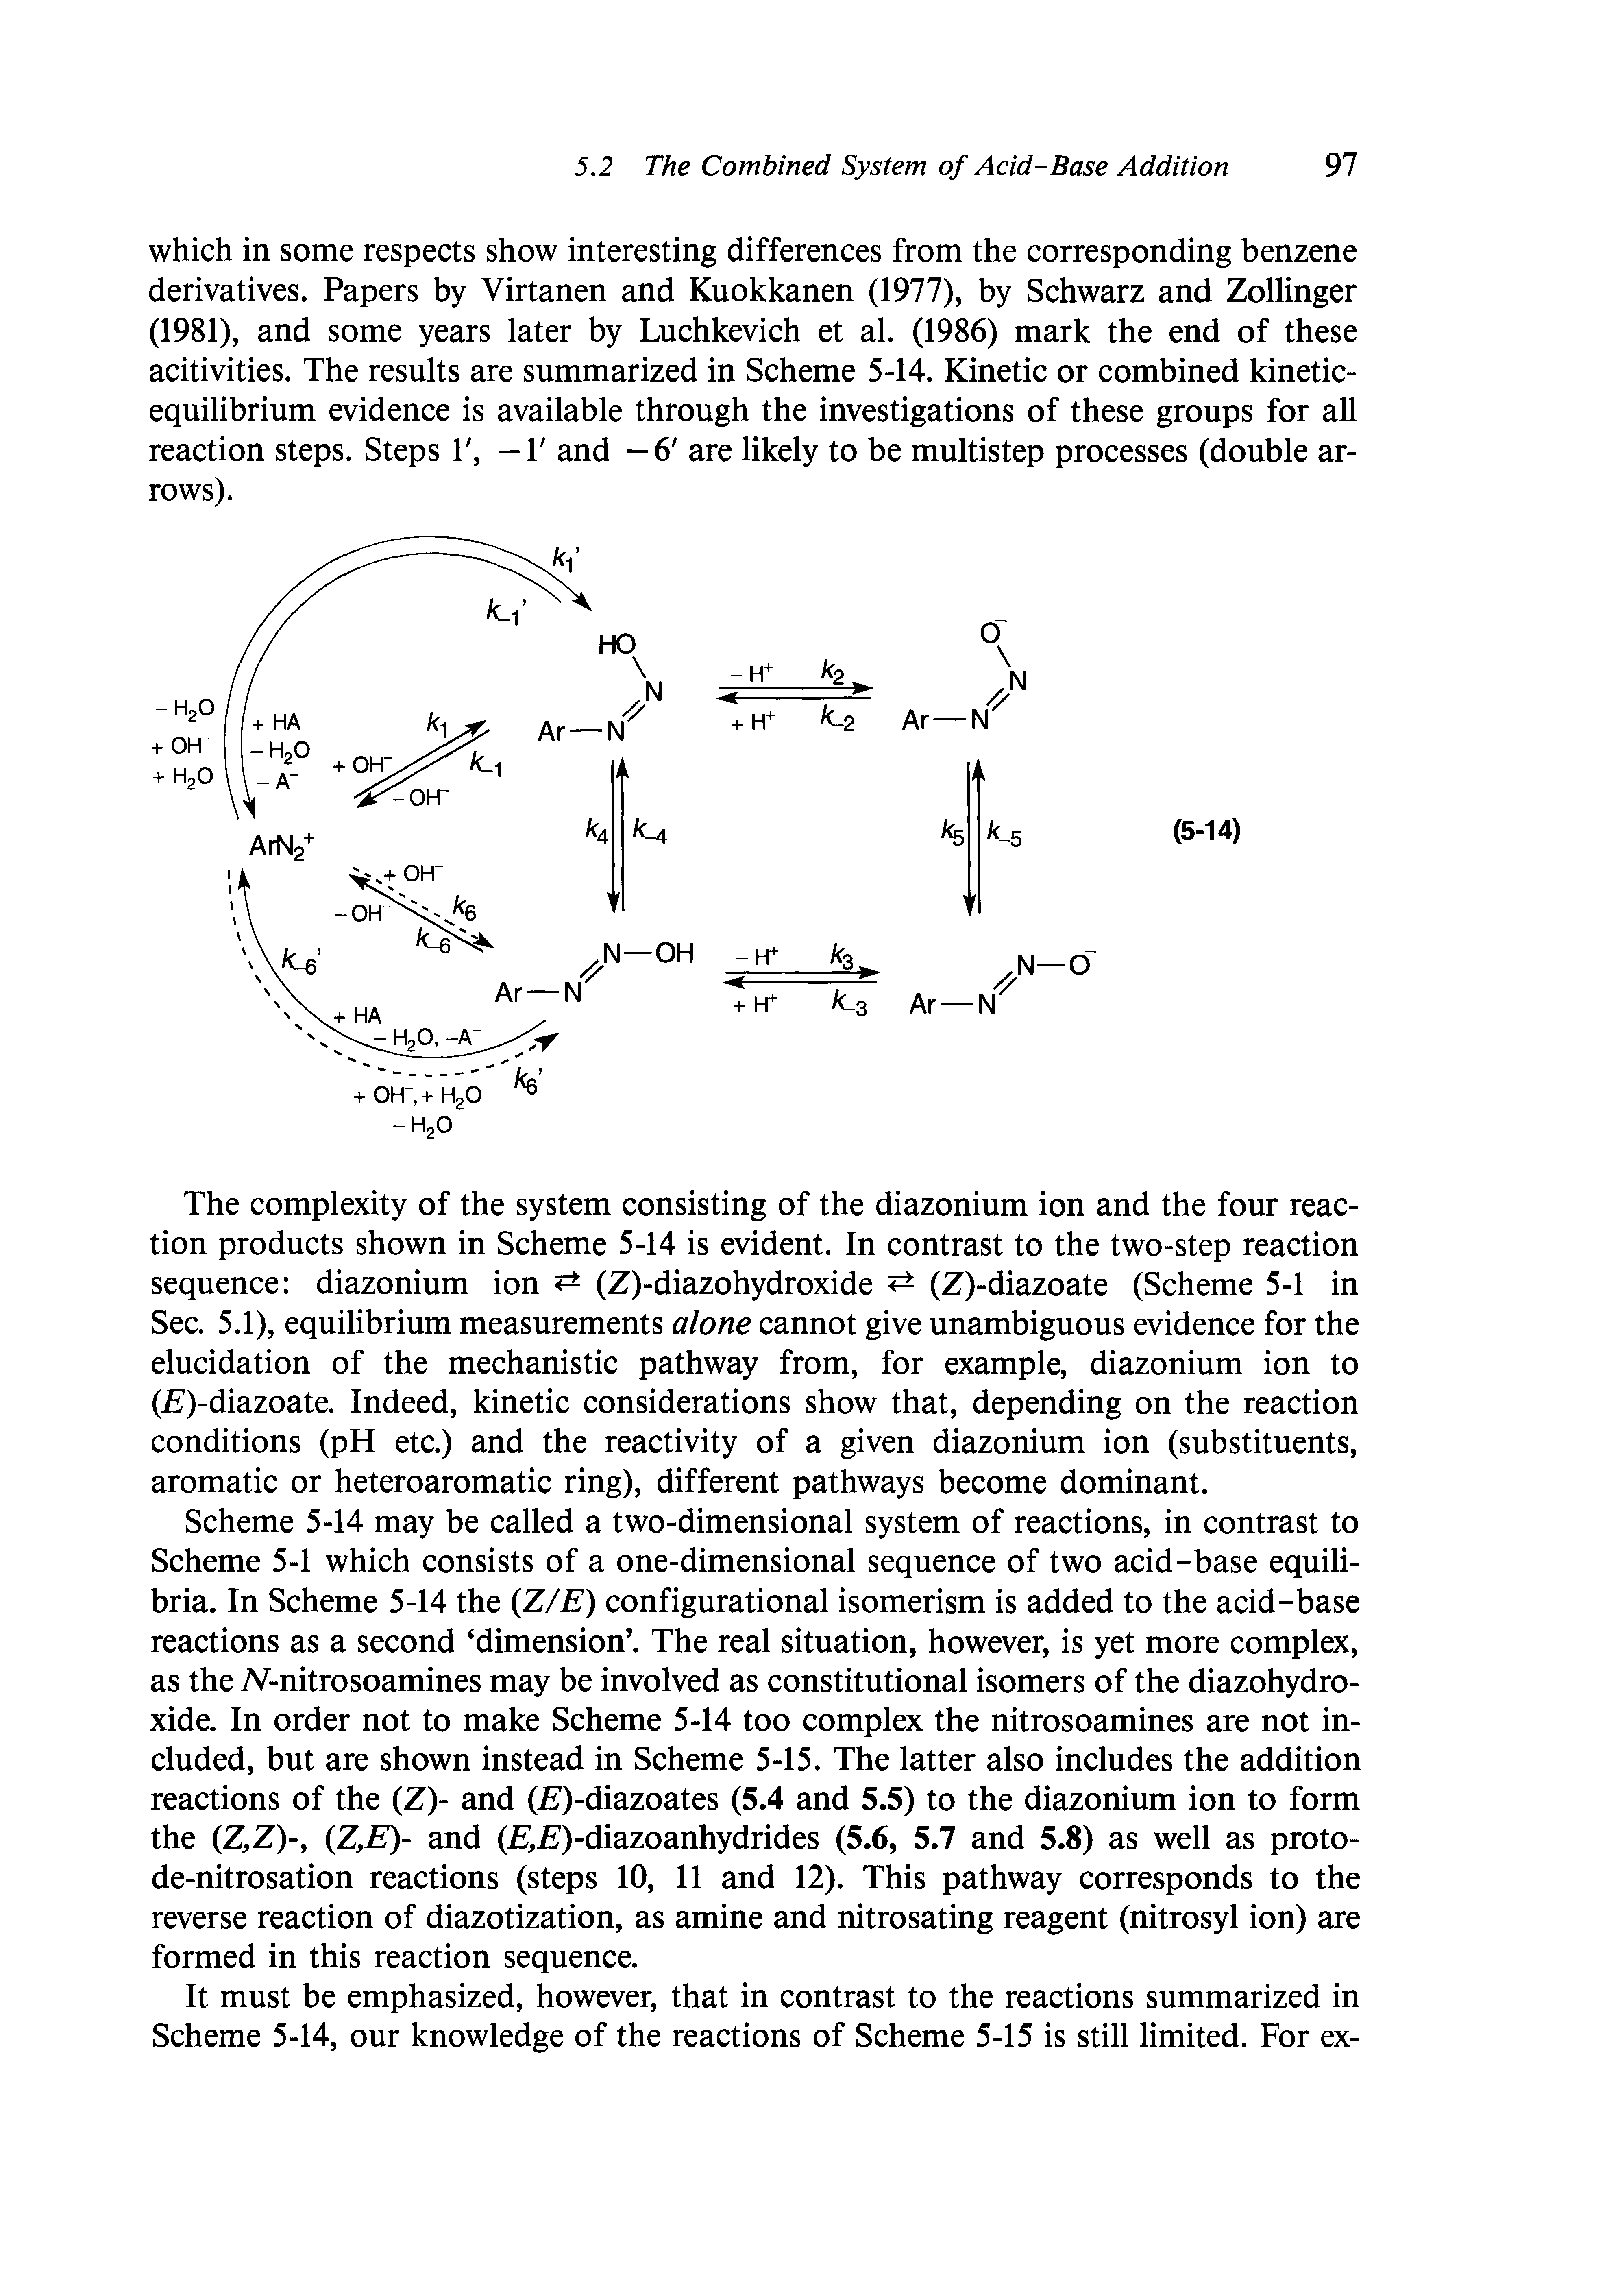 Scheme 5-14 may be called a two-dimensional system of reactions, in contrast to Scheme 5-1 which consists of a one-dimensional sequence of two acid-base equilibria. In Scheme 5-14 the (Z/E) configurational isomerism is added to the acid-base reactions as a second dimension . The real situation, however, is yet more complex, as the TV-nitrosoamines may be involved as constitutional isomers of the diazohydroxide. In order not to make Scheme 5-14 too complex the nitrosoamines are not included, but are shown instead in Scheme 5-15. The latter also includes the addition reactions of the (Z)- and ( )-diazoates (5.4 and 5.5) to the diazonium ion to form the (Z,Z)-, (Z,E)- and (2 2i)-diazoanhydrides (5.6, 5.7 and 5.8) as well as proto-de-nitrosation reactions (steps 10, 11 and 12). This pathway corresponds to the reverse reaction of diazotization, as amine and nitrosating reagent (nitrosyl ion) are formed in this reaction sequence.